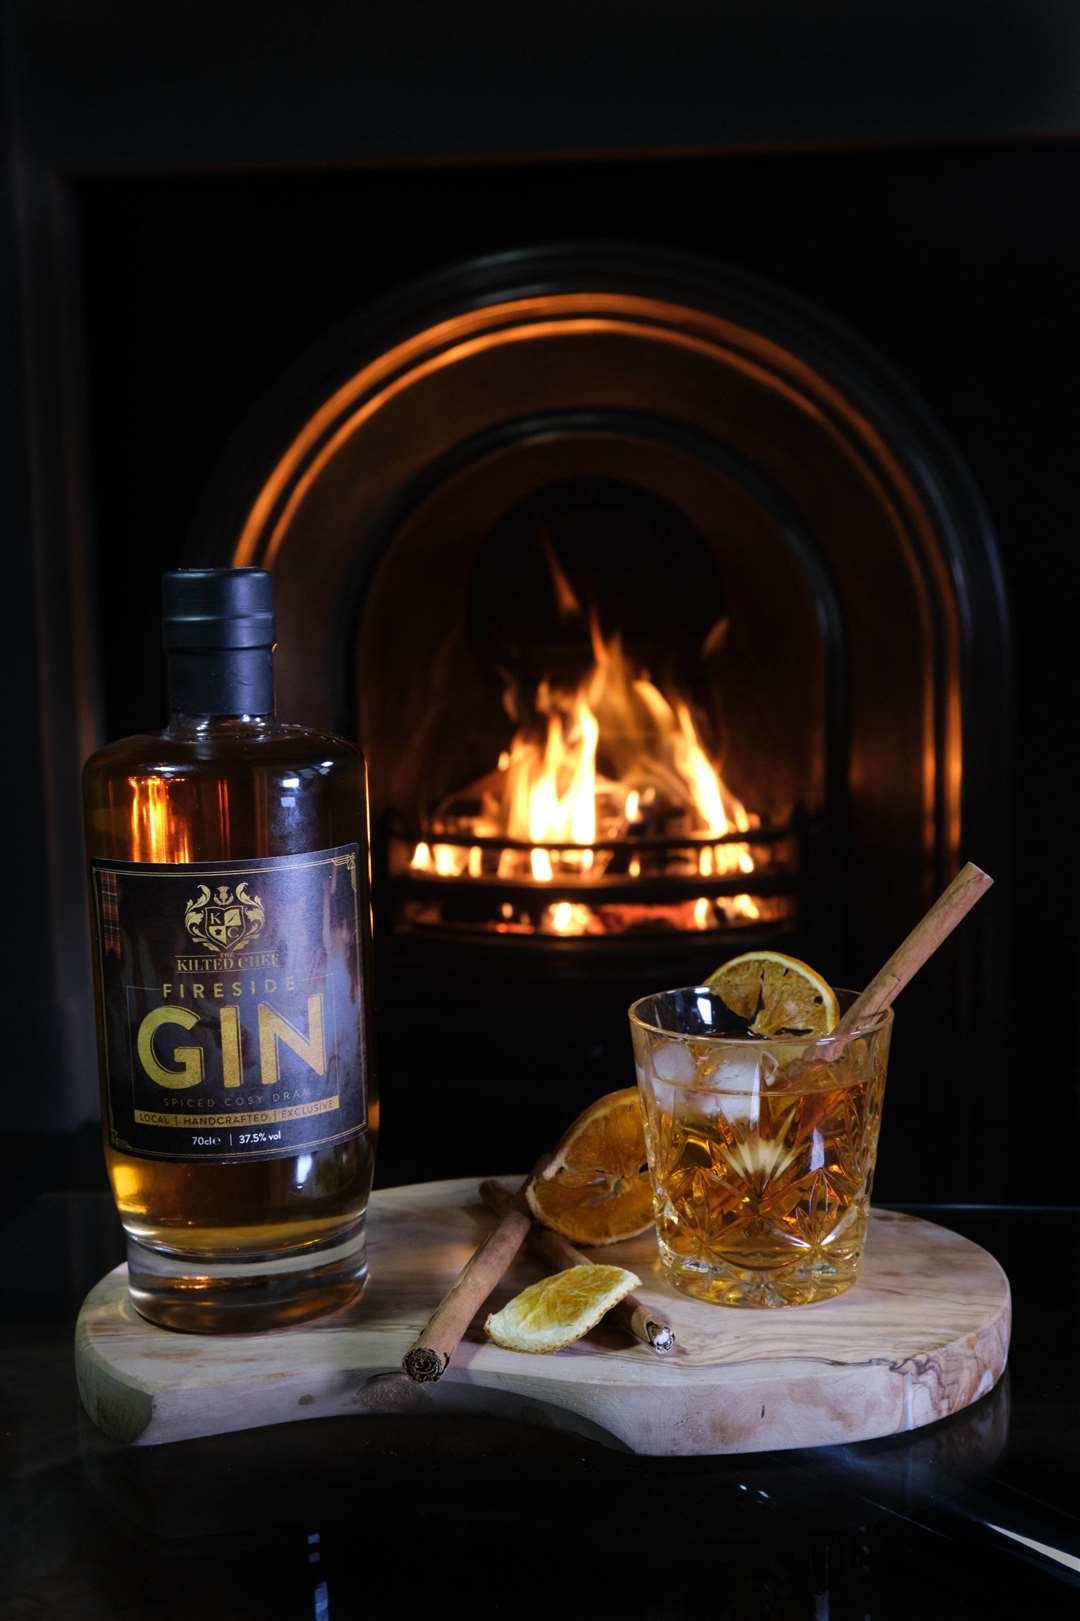 Kilted Chef Craig Wilson has teamed up with The Gin Bothy to create the Kilted Chef Fireside Gin.